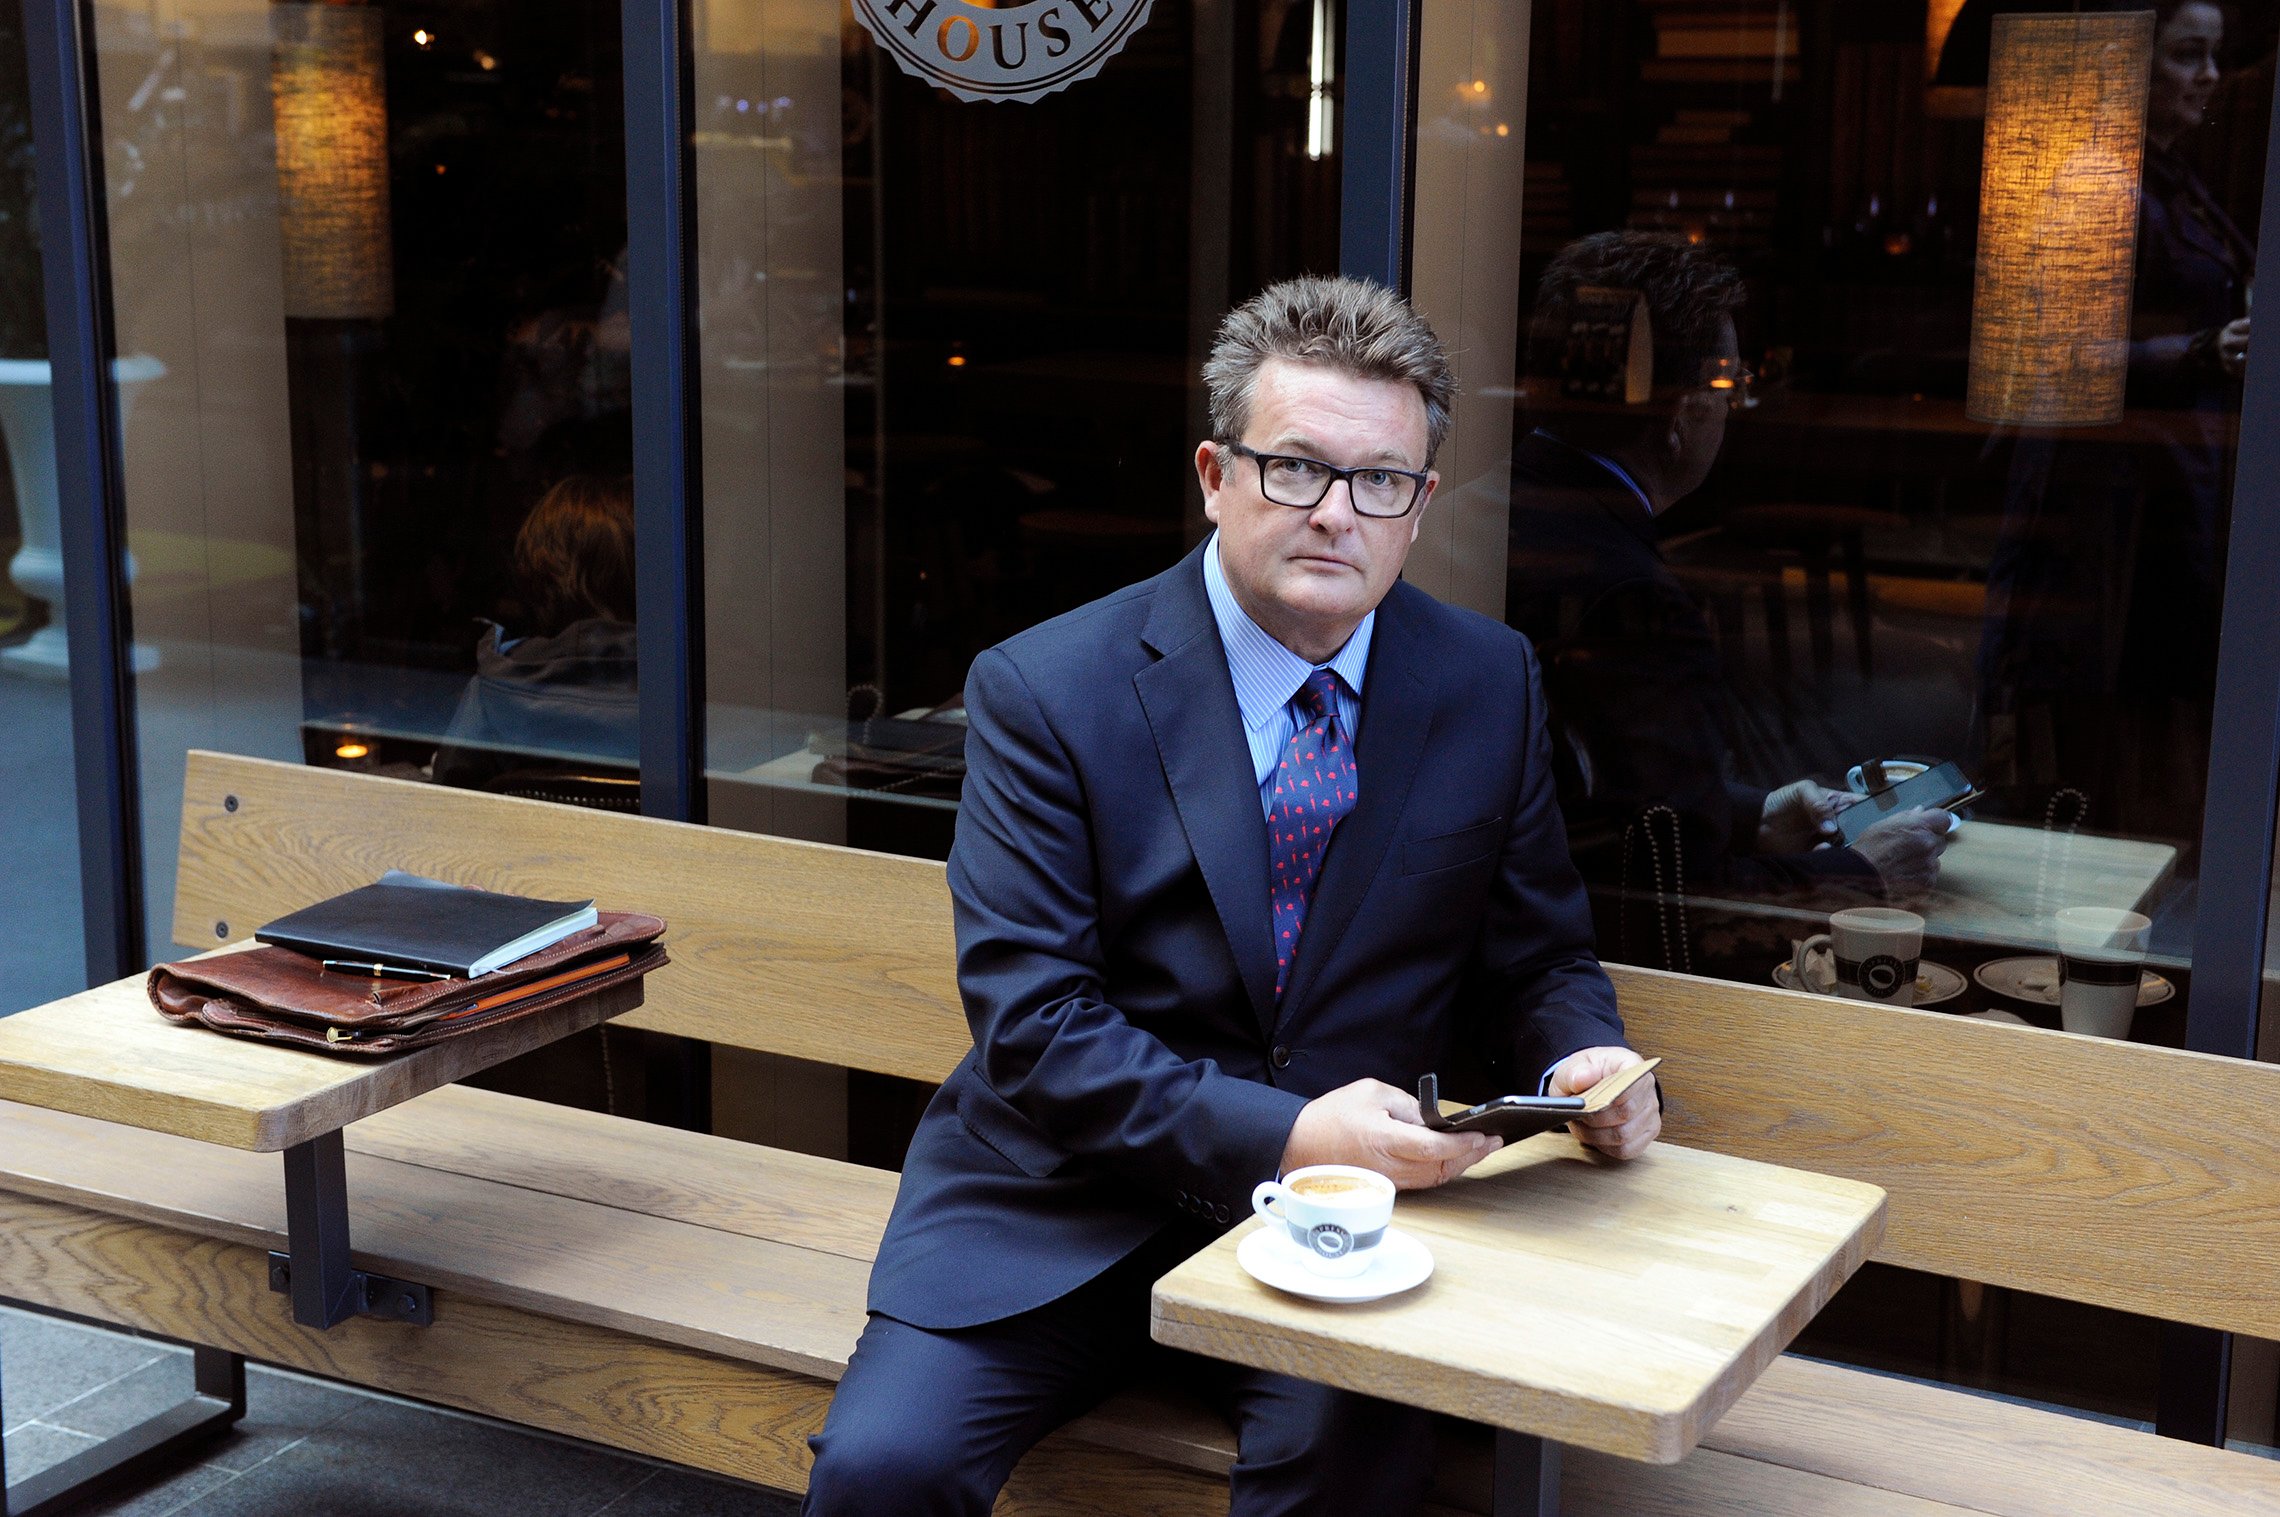 Acting Executive Vice President Gunnar Henriksen sits at a table next to a coffee shop